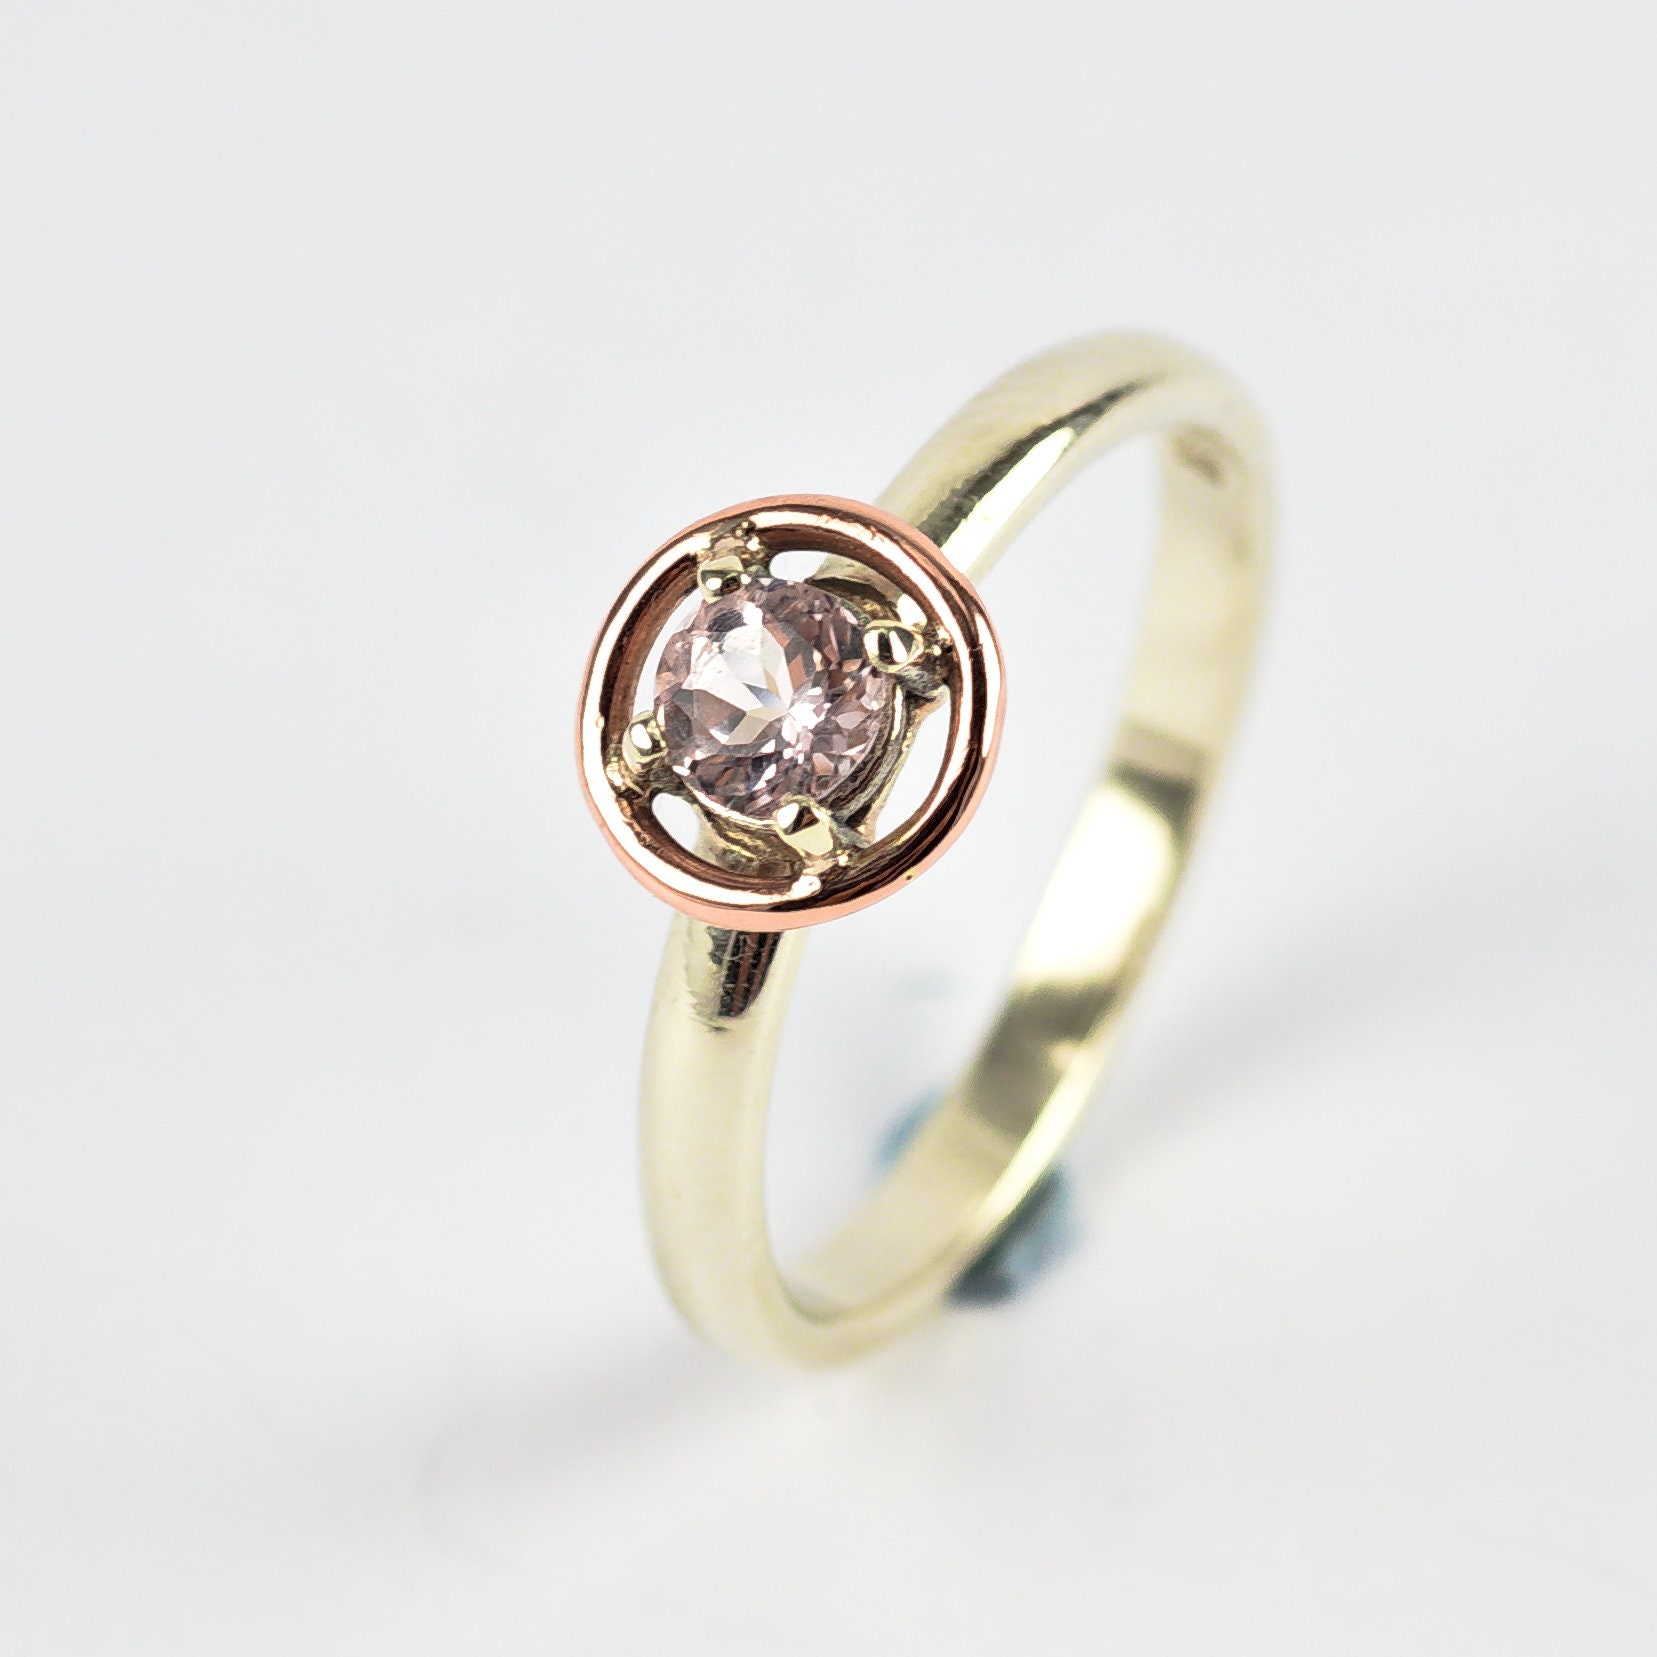 One Of A Kind Morganite Engagement Ring, Two Tone 9K Rose Gold & White Gold, Size 6 1/4